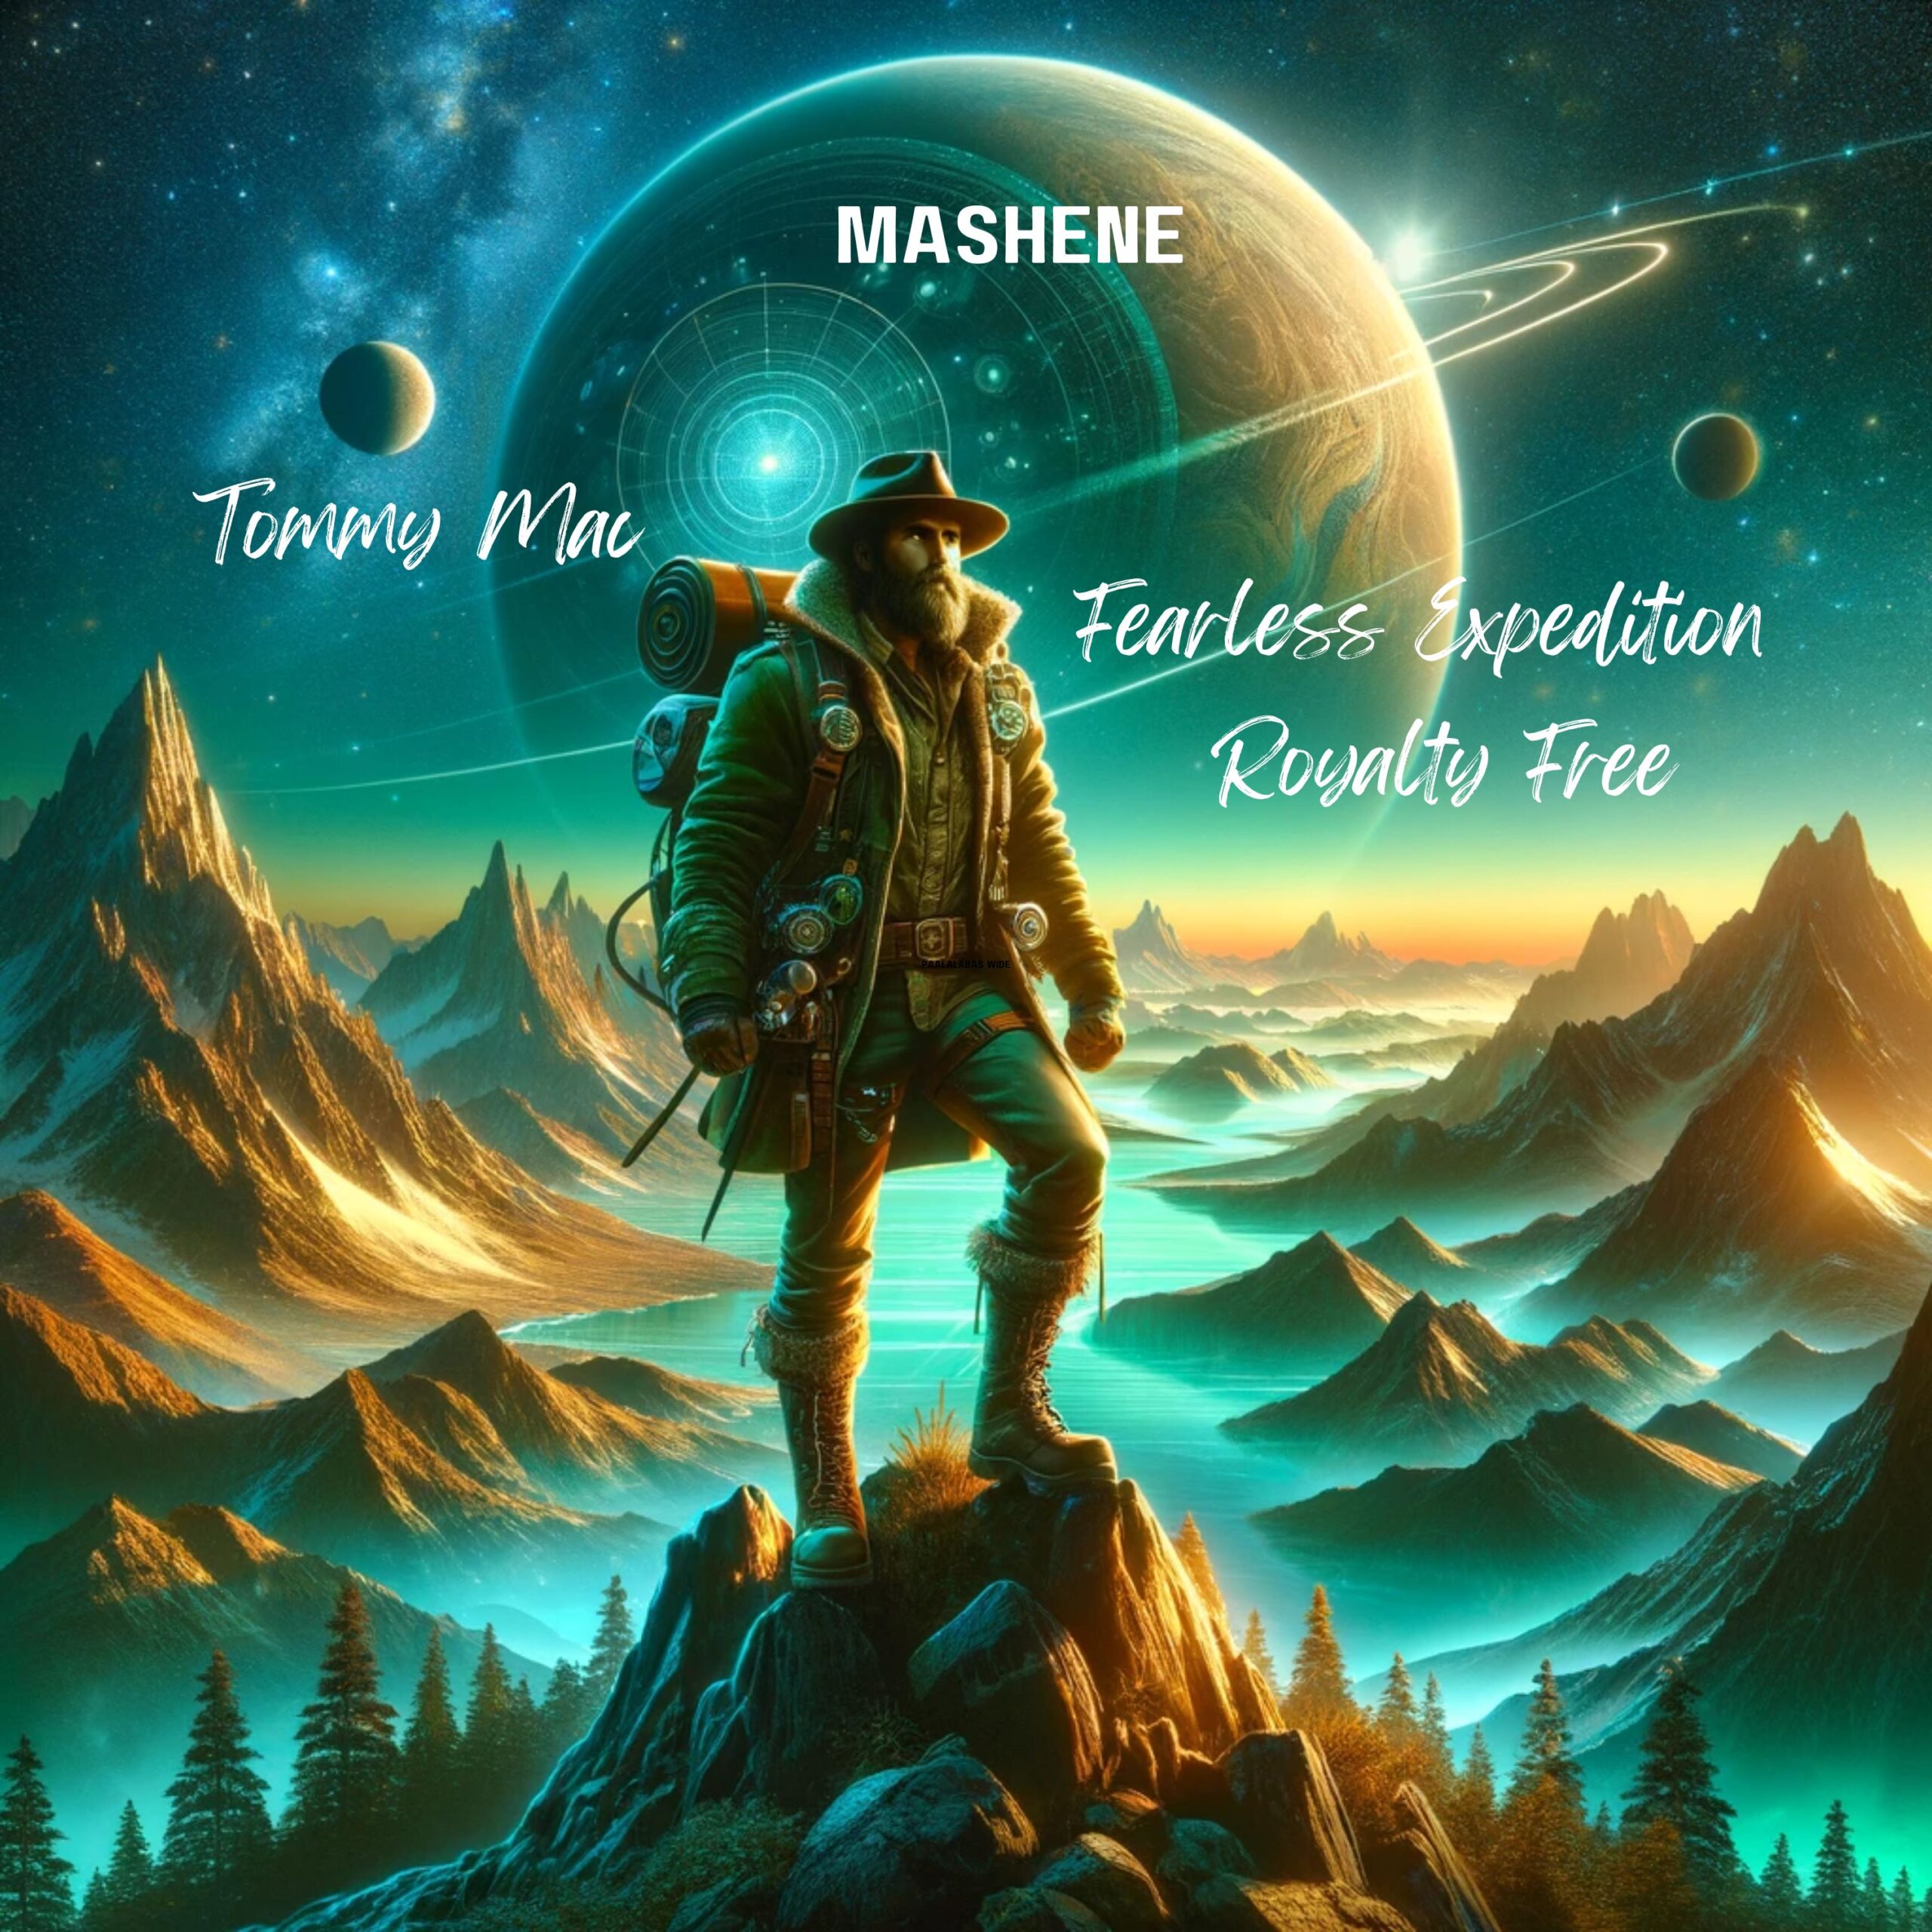 Alt Text: "Album "Fearless Expedition" cover depicting an explorer (producer, composer: Tommy Mac, Las Vegas) in vintage gear standing on a mountain peak in the colorado rockies, overlooking an alien landscape depecting his artist name: MASHENE with luminescent waters under a starlit sky, proclaiming "Royalty Free Music"